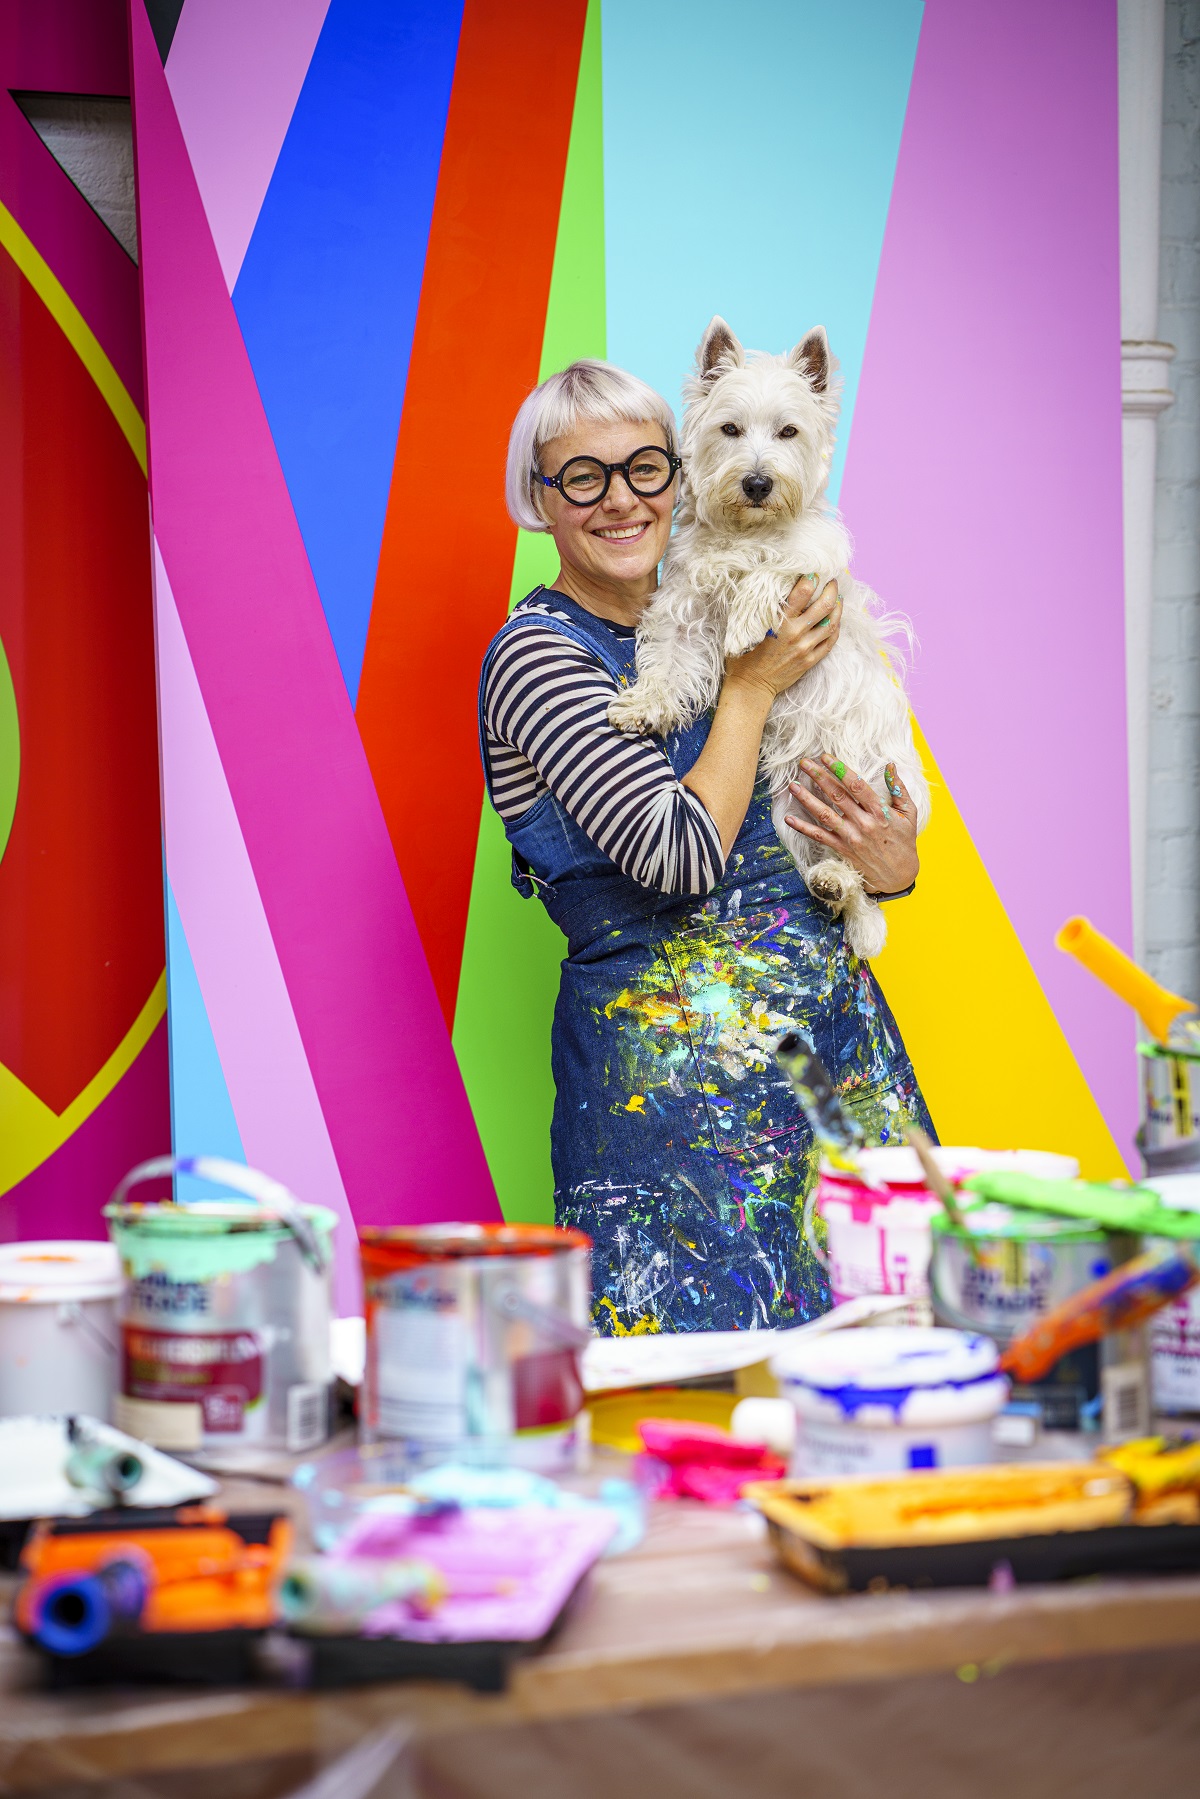 Morag Myerscough against colourful backdrop with small dog